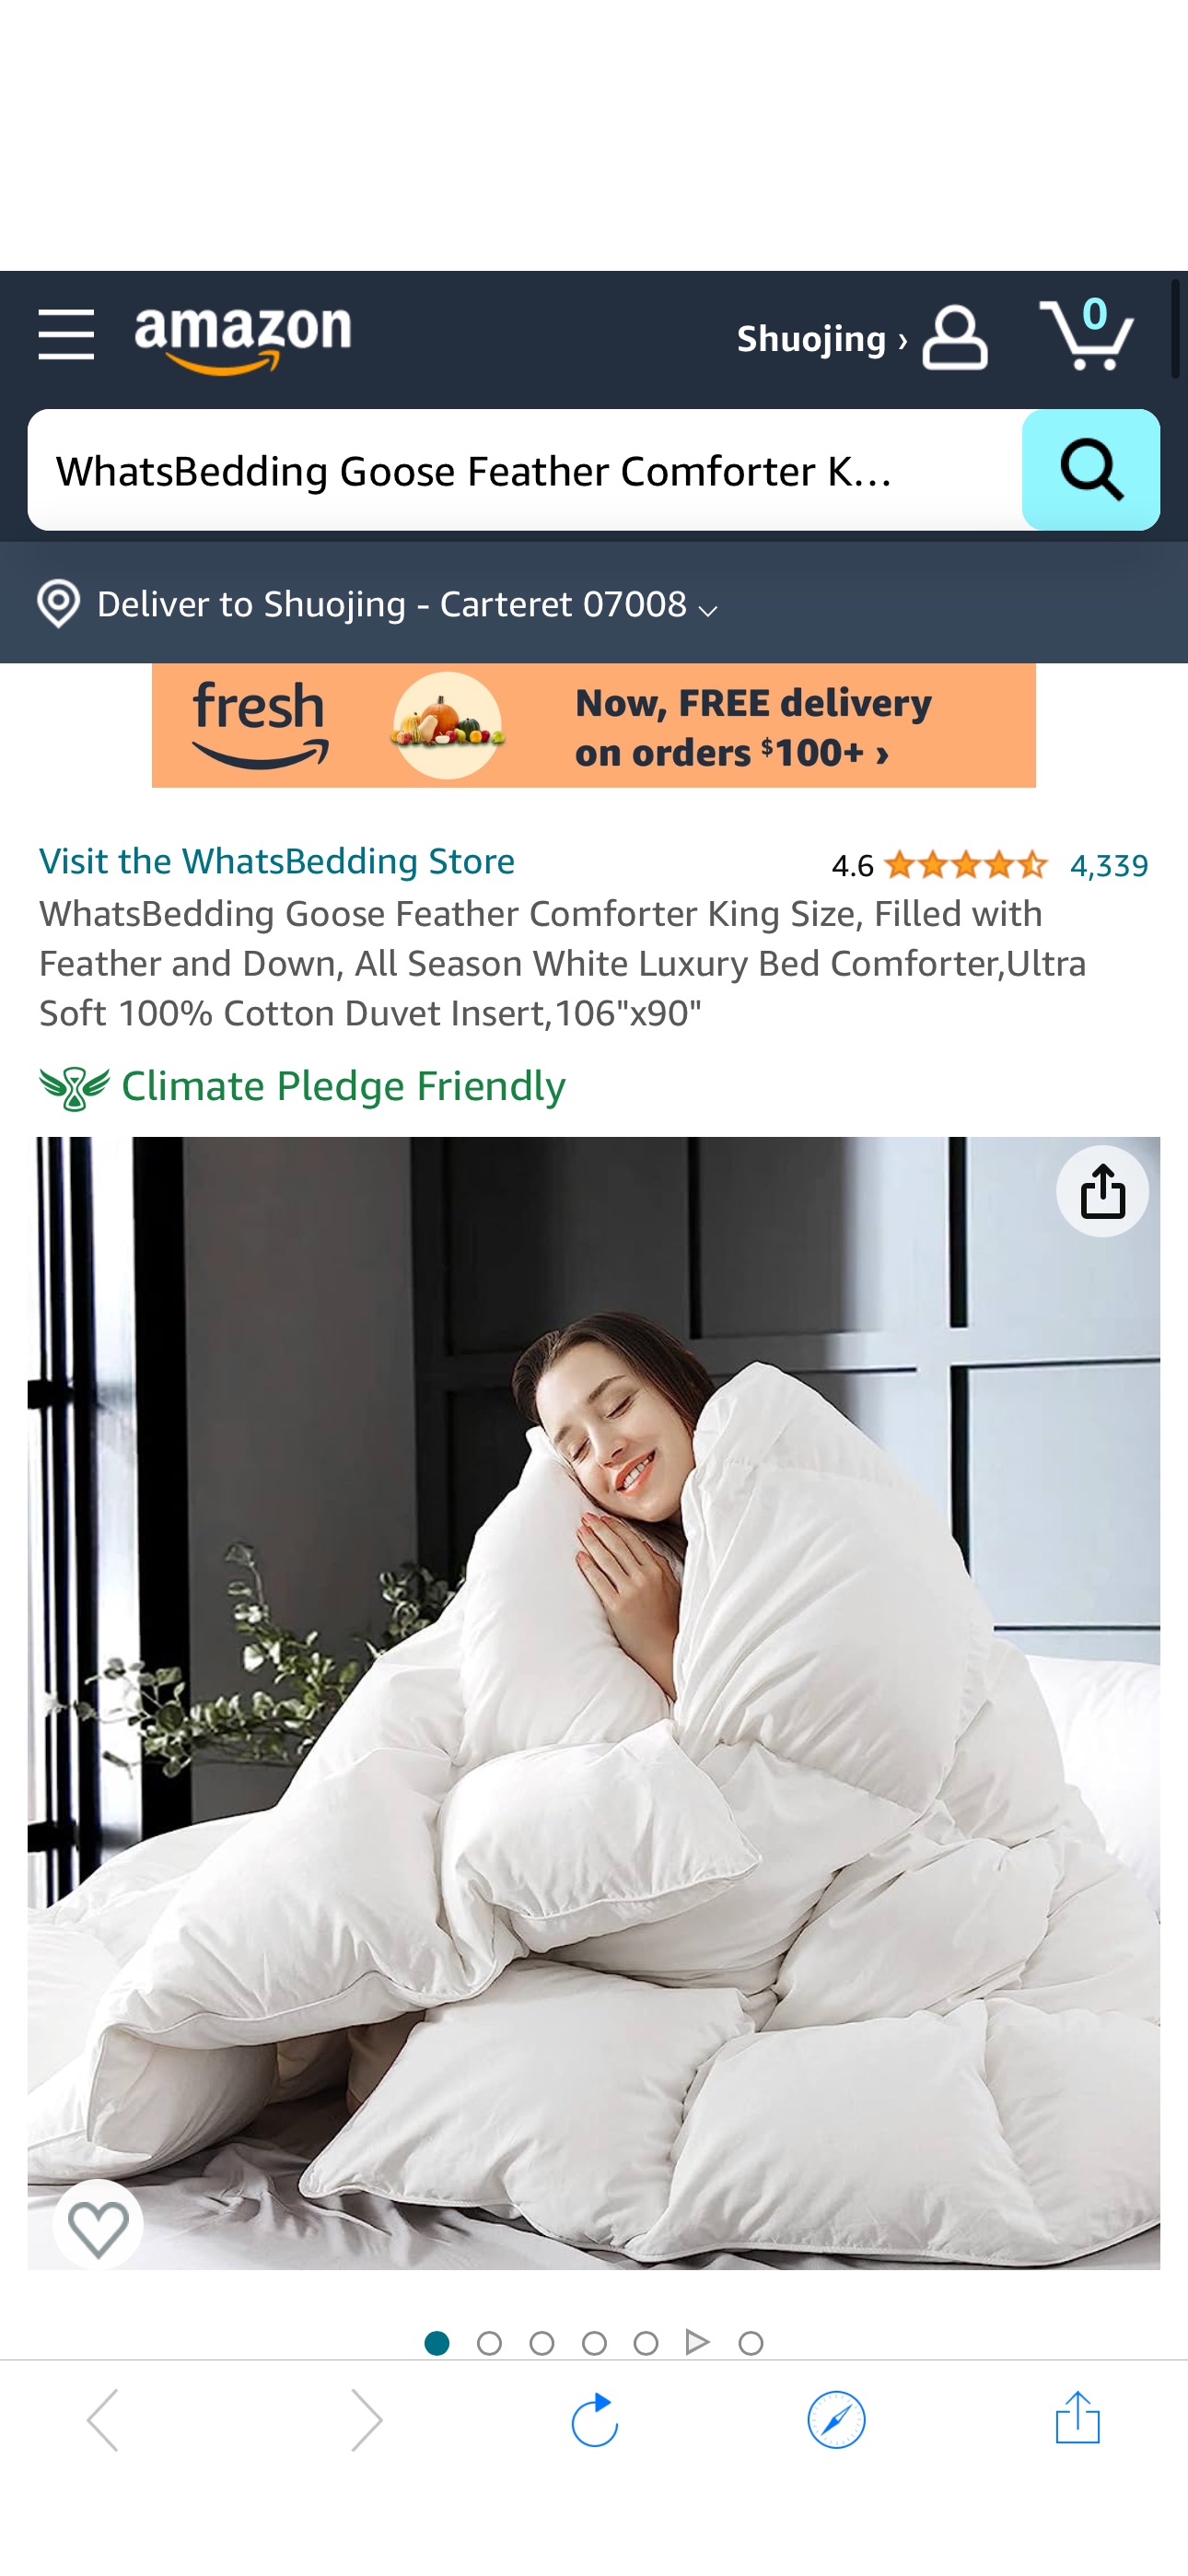 Amazon.com: WhatsBedding Goose Feather Comforter King Size, Filled with Feather and Down, All Season White Luxury Bed Comforter,Ultra Soft 100% Cotton Duvet Insert,106"x90" : Home & Kitchen冬被